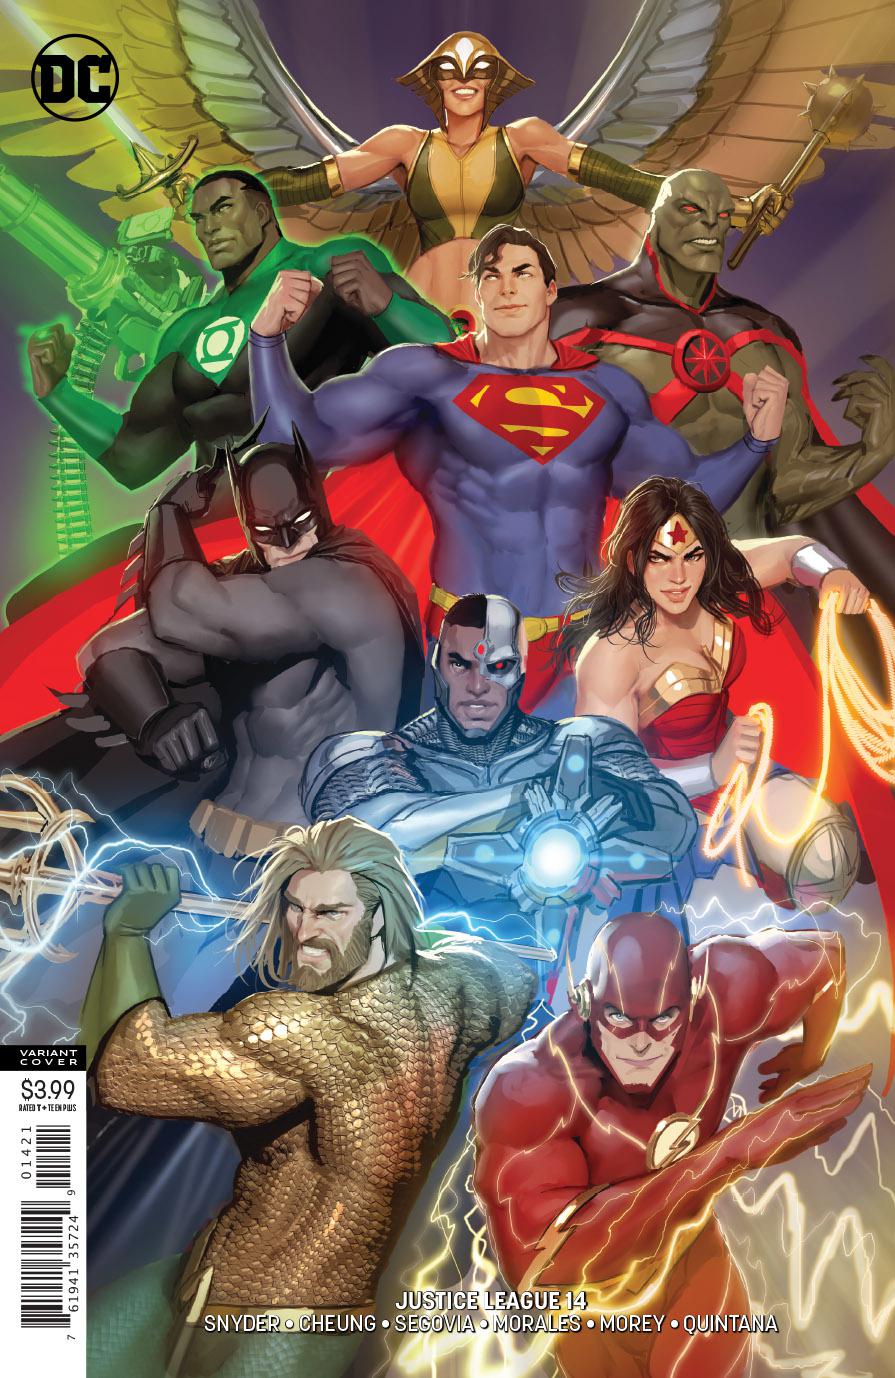 Justice League Vol 4 #14 Cover B Variant Stjepan Sejic Cover